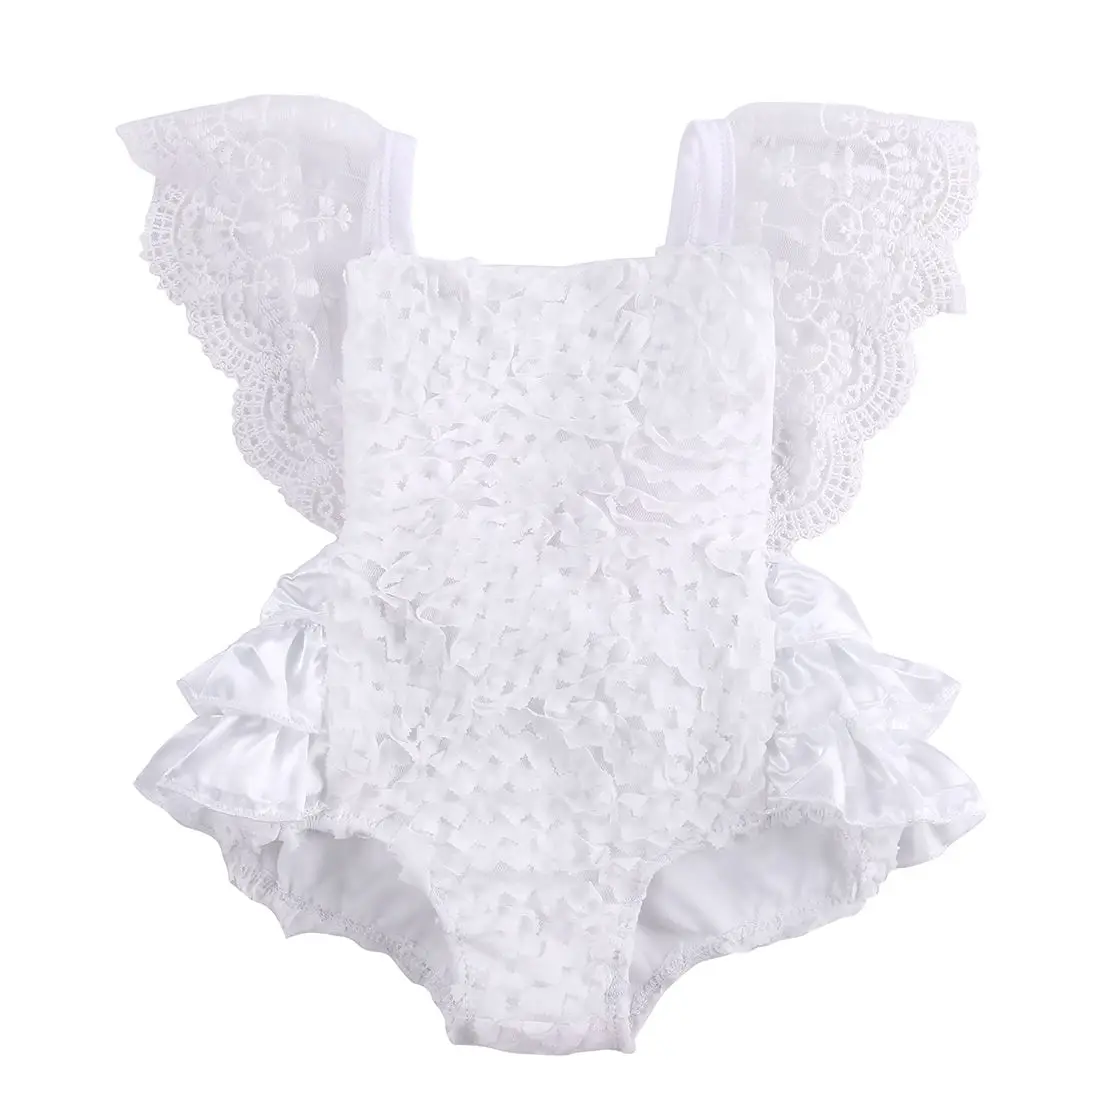 Newborn Baby Summer Clothing Princess Girls Romper Lace Floral Ruffle Sunsuit Sleeveless White Jumpsuit Outfits Clothes 0-18M images - 6